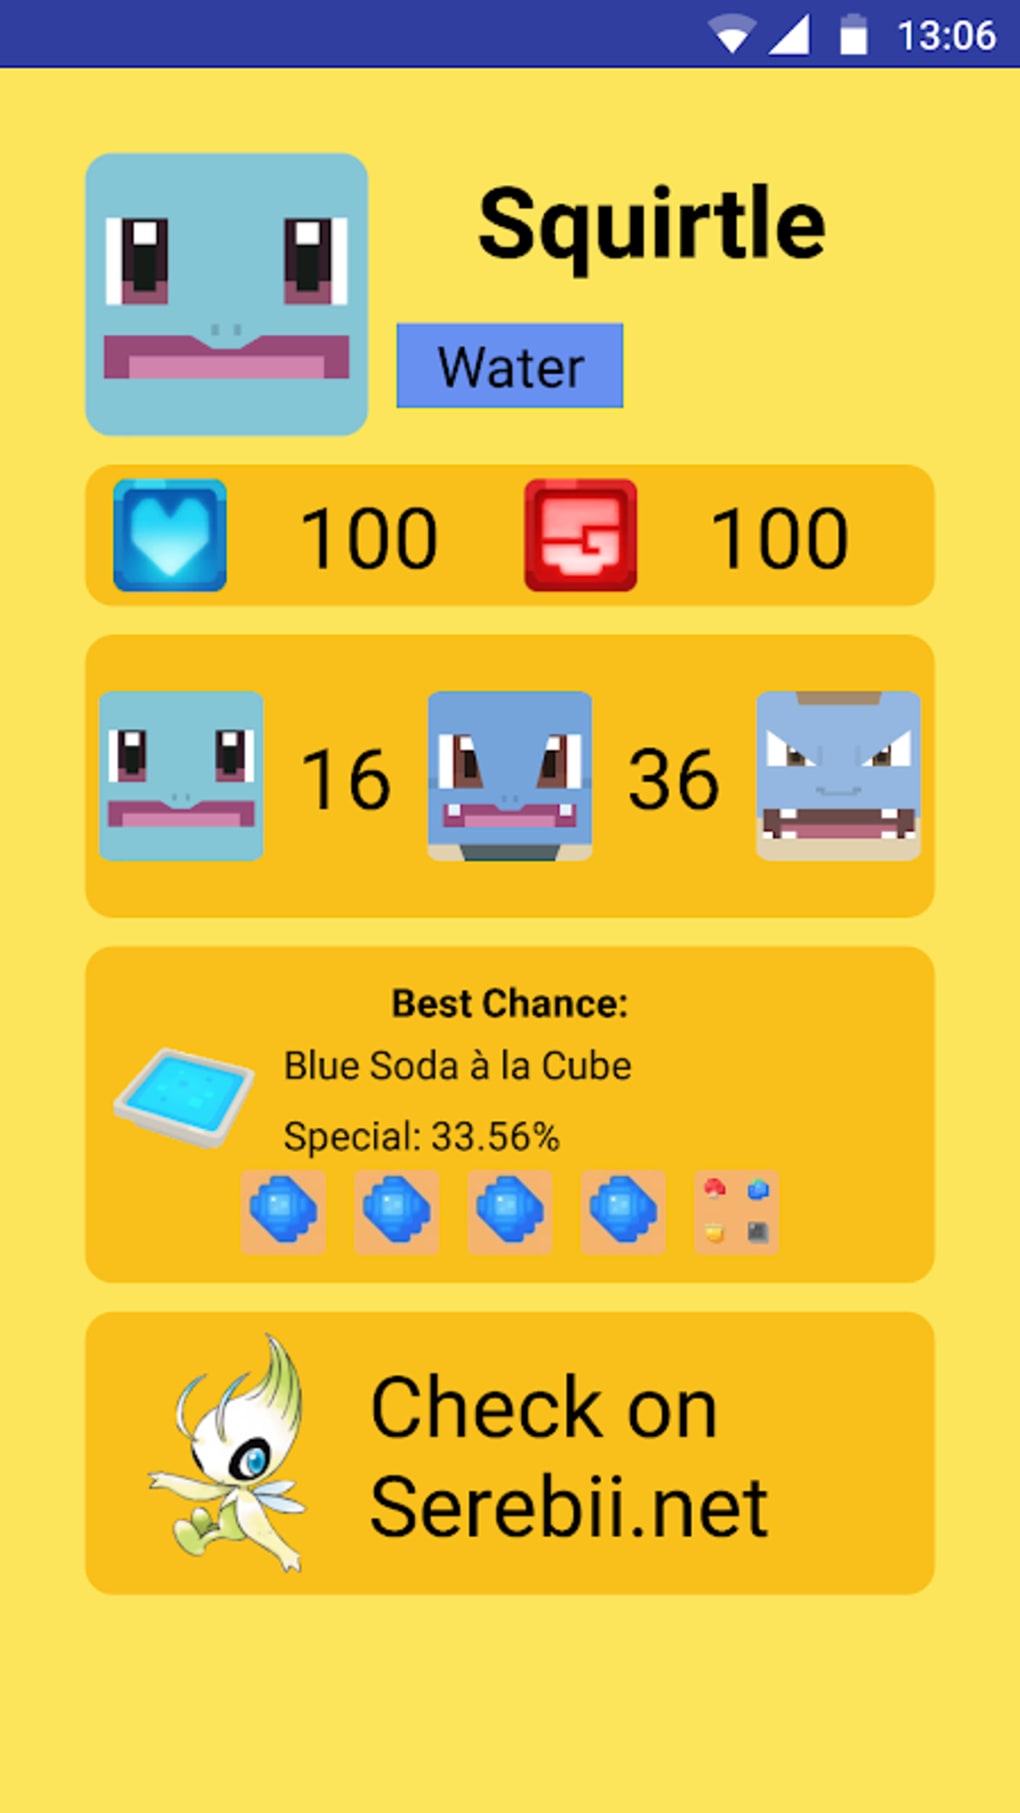 Pokemon Quest recipe guide: Get cookin' with a full list of recipes!